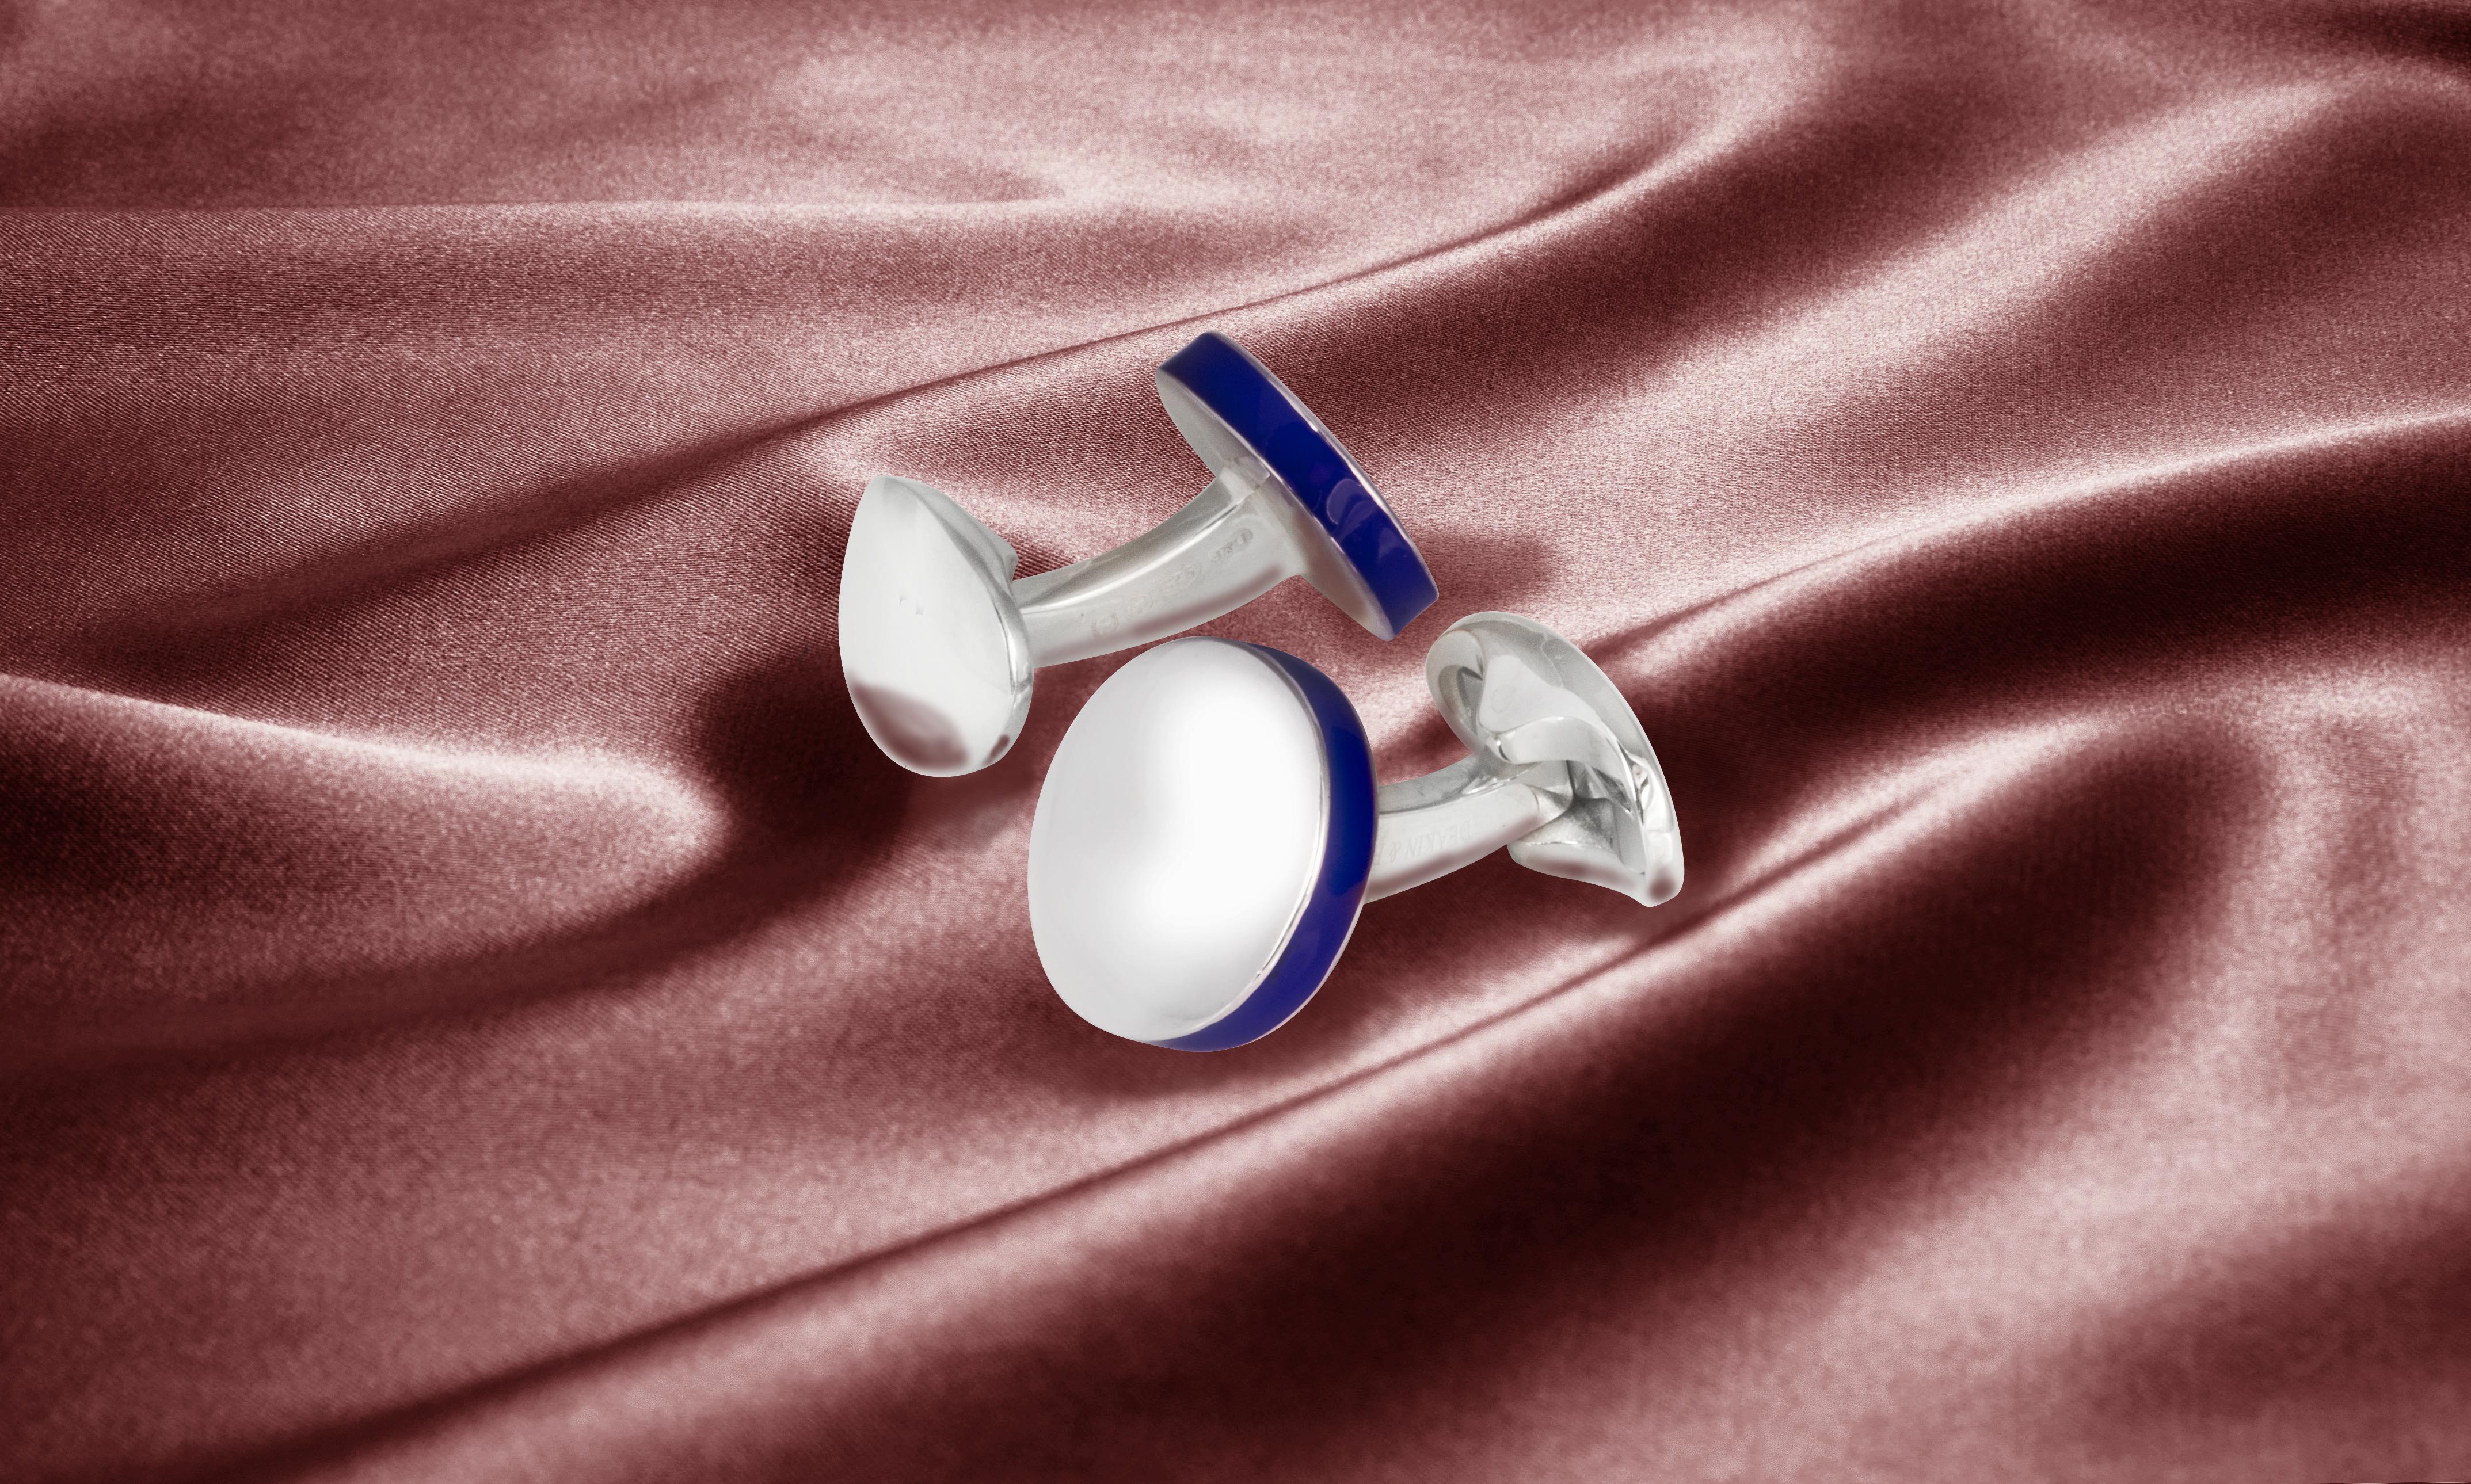 DEAKIN & FRANCIS, Piccadilly Arcade, London.

Classic, timeless and traditional. But, with a subtle splash of colour! This pair of cufflinks is the perfect choice for the sophisticated gentleman.
In an elegant round shape, these cufflinks have been